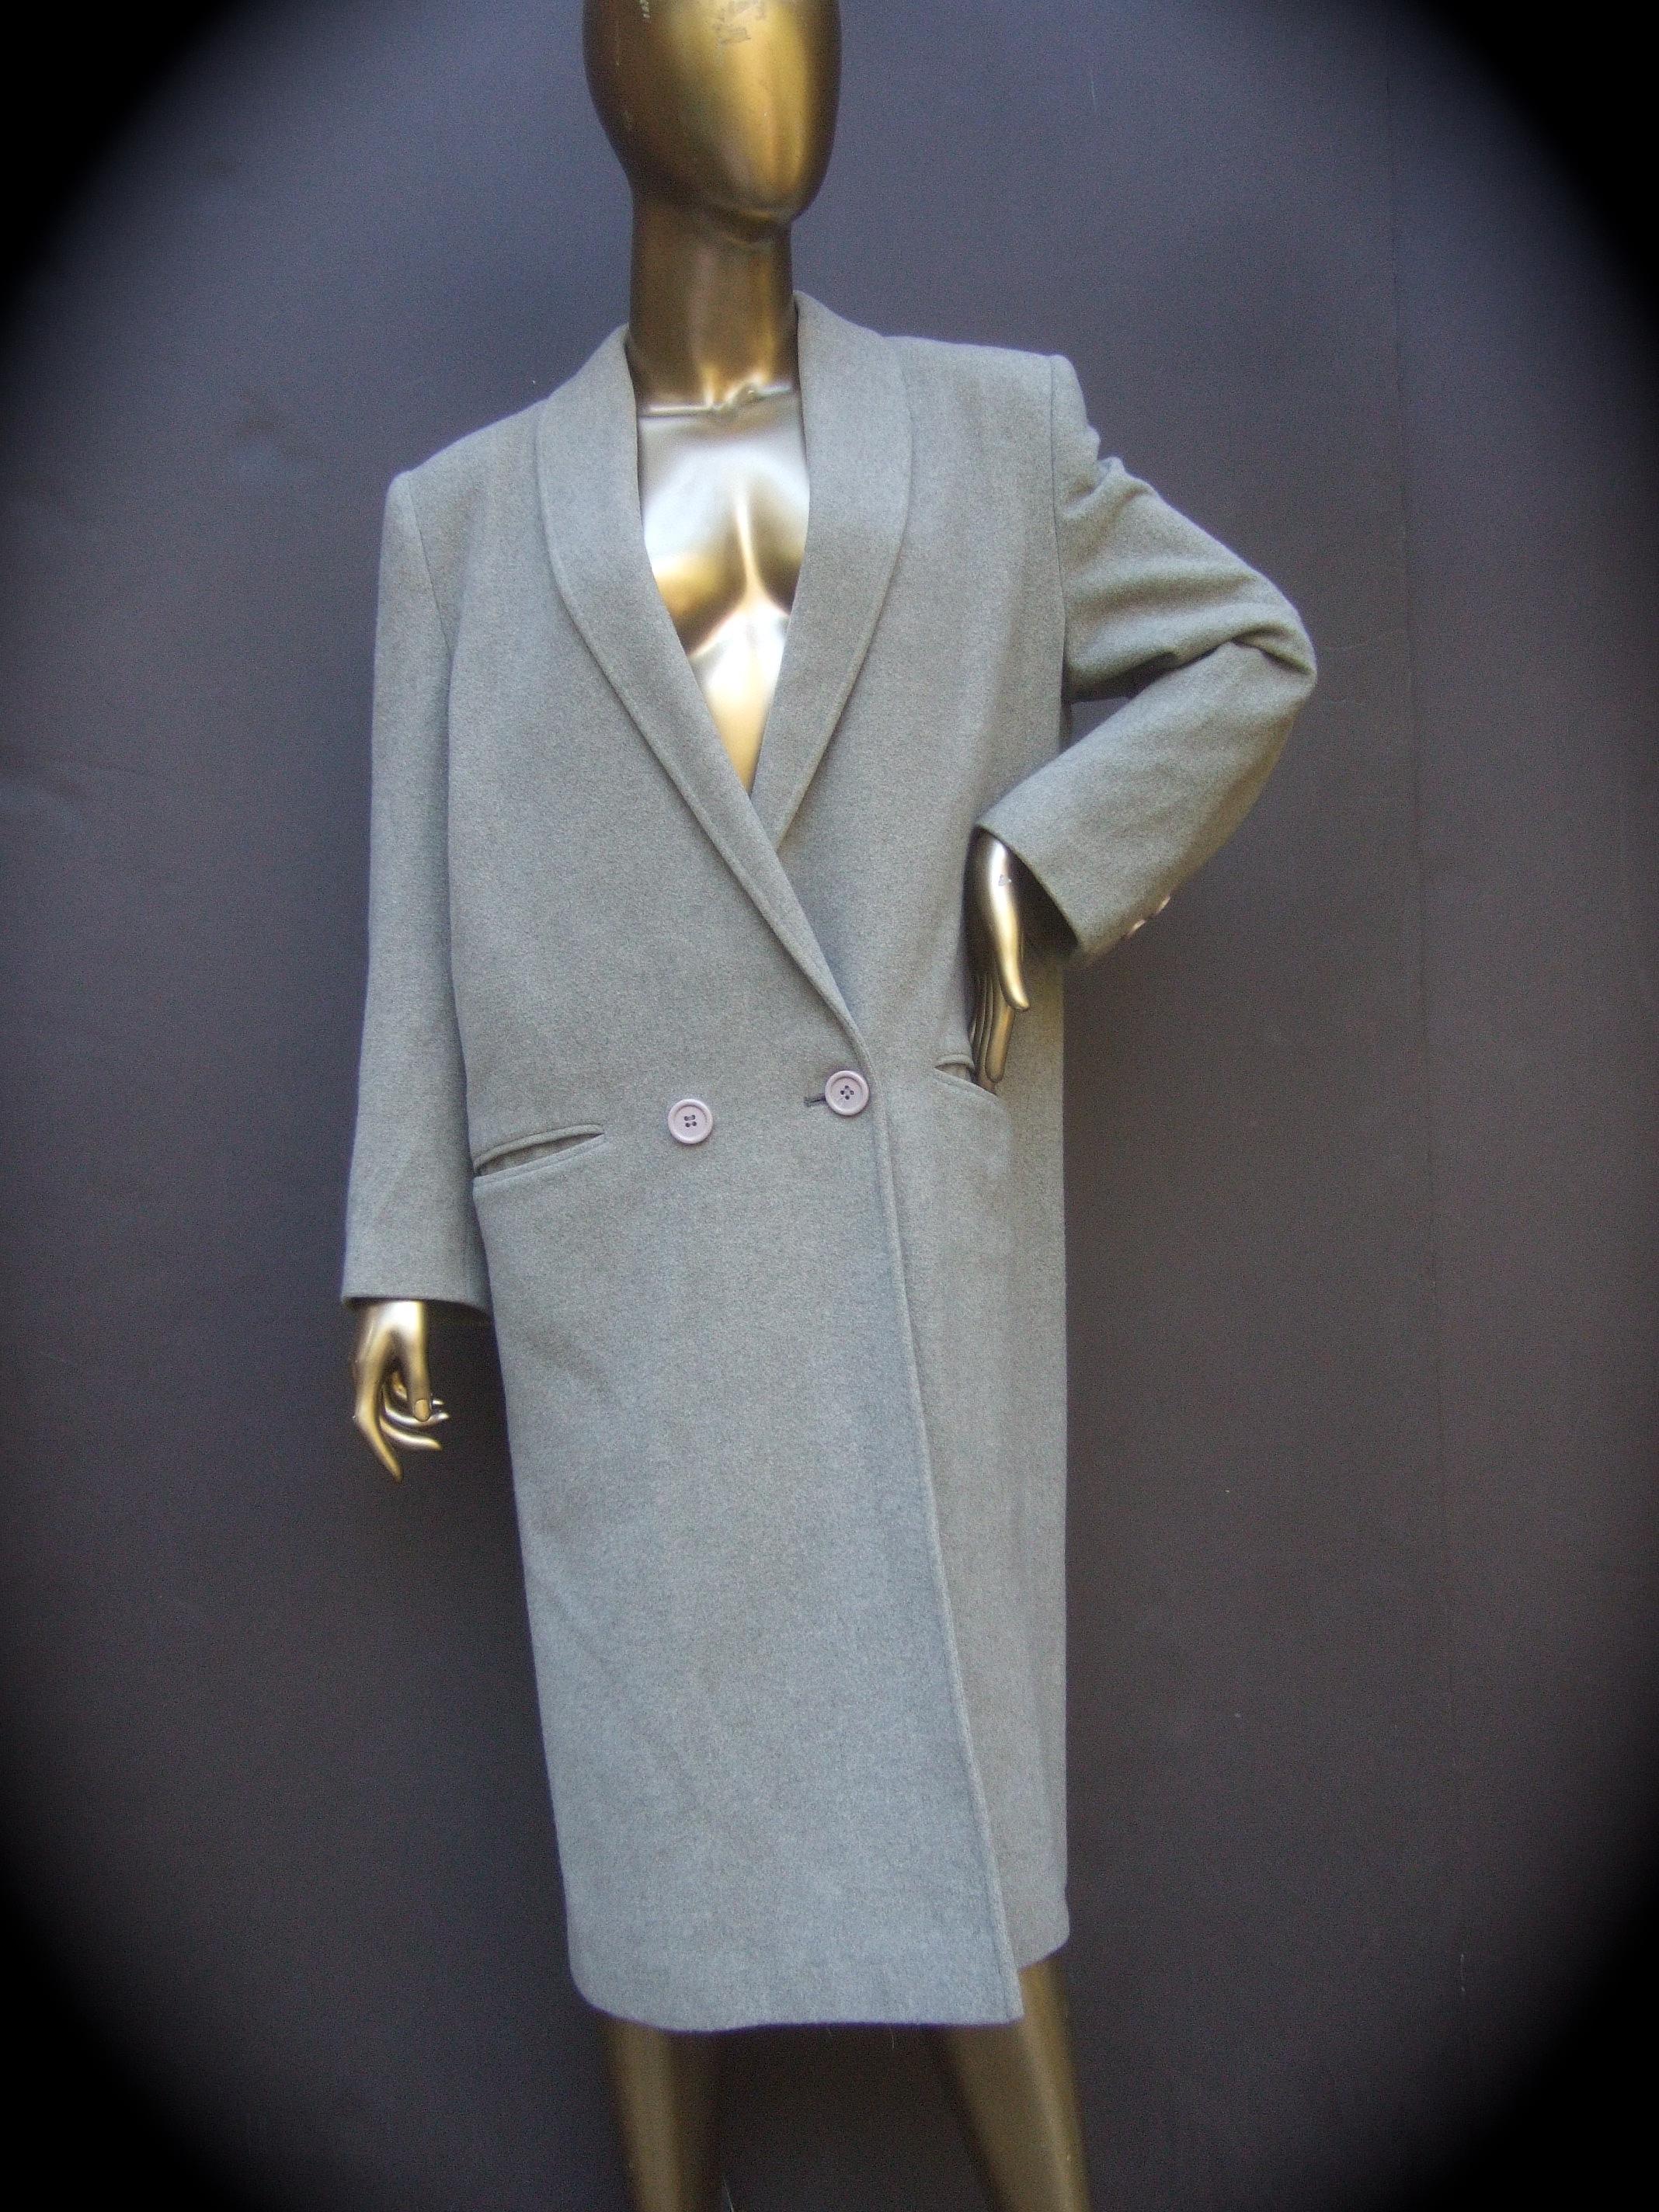 Cashmere classic heather gray women's overcoat c 1980s
The stylish winter coat is constructed with plush luxurious cashmere

Designed with a rounded elongated collar that secures with two horizontal resin buttons for an overlapped silhouette. A pair